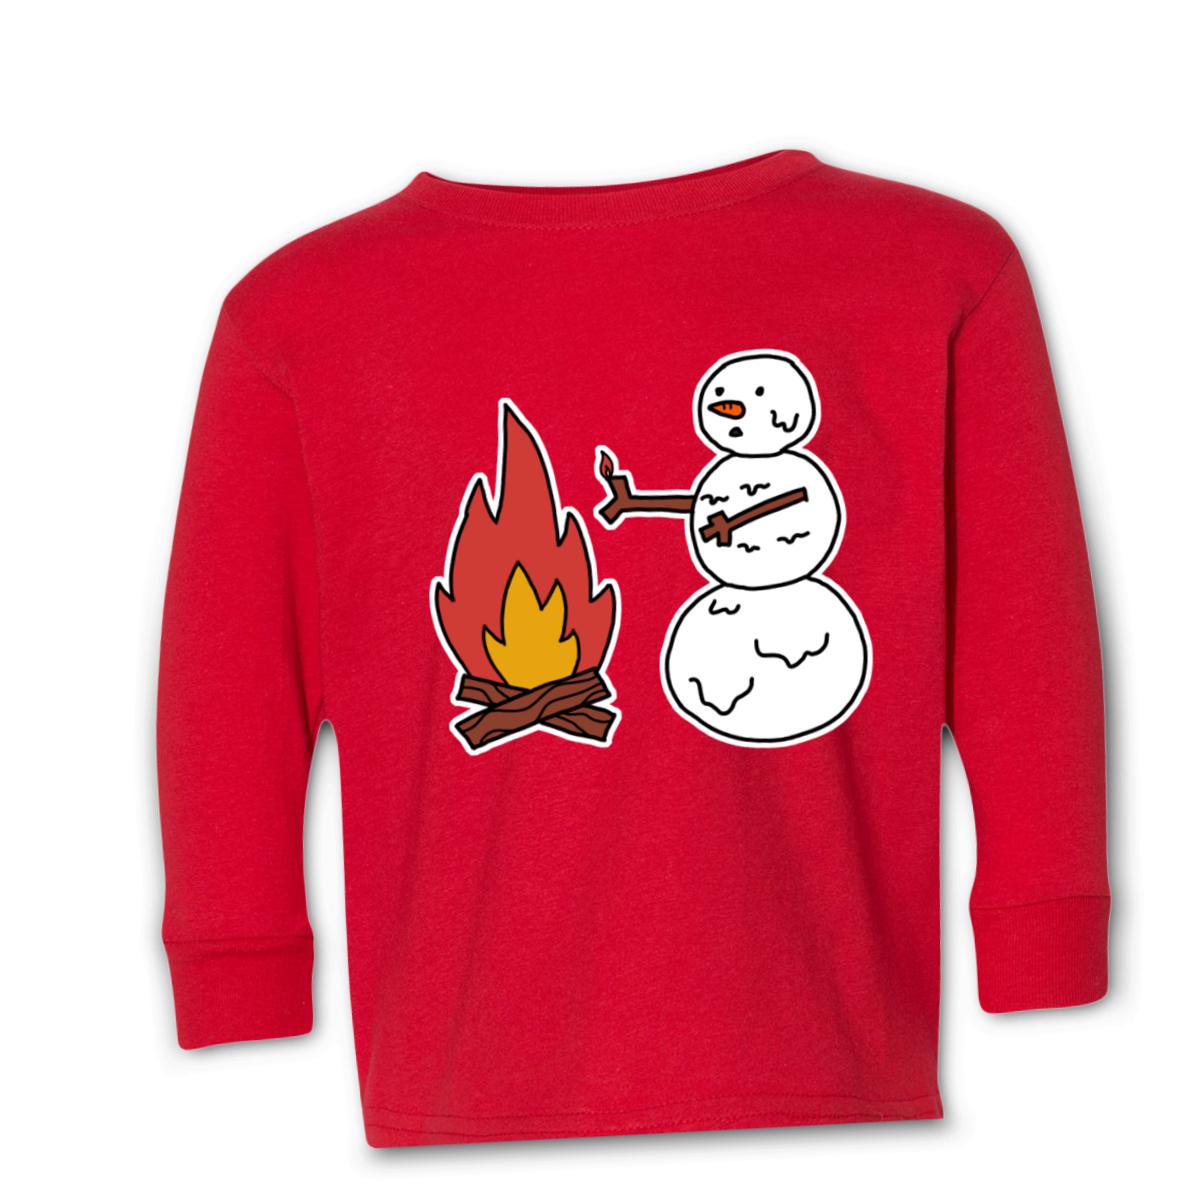 Snowman Keeping Warm Toddler Long Sleeve Tee 56T red